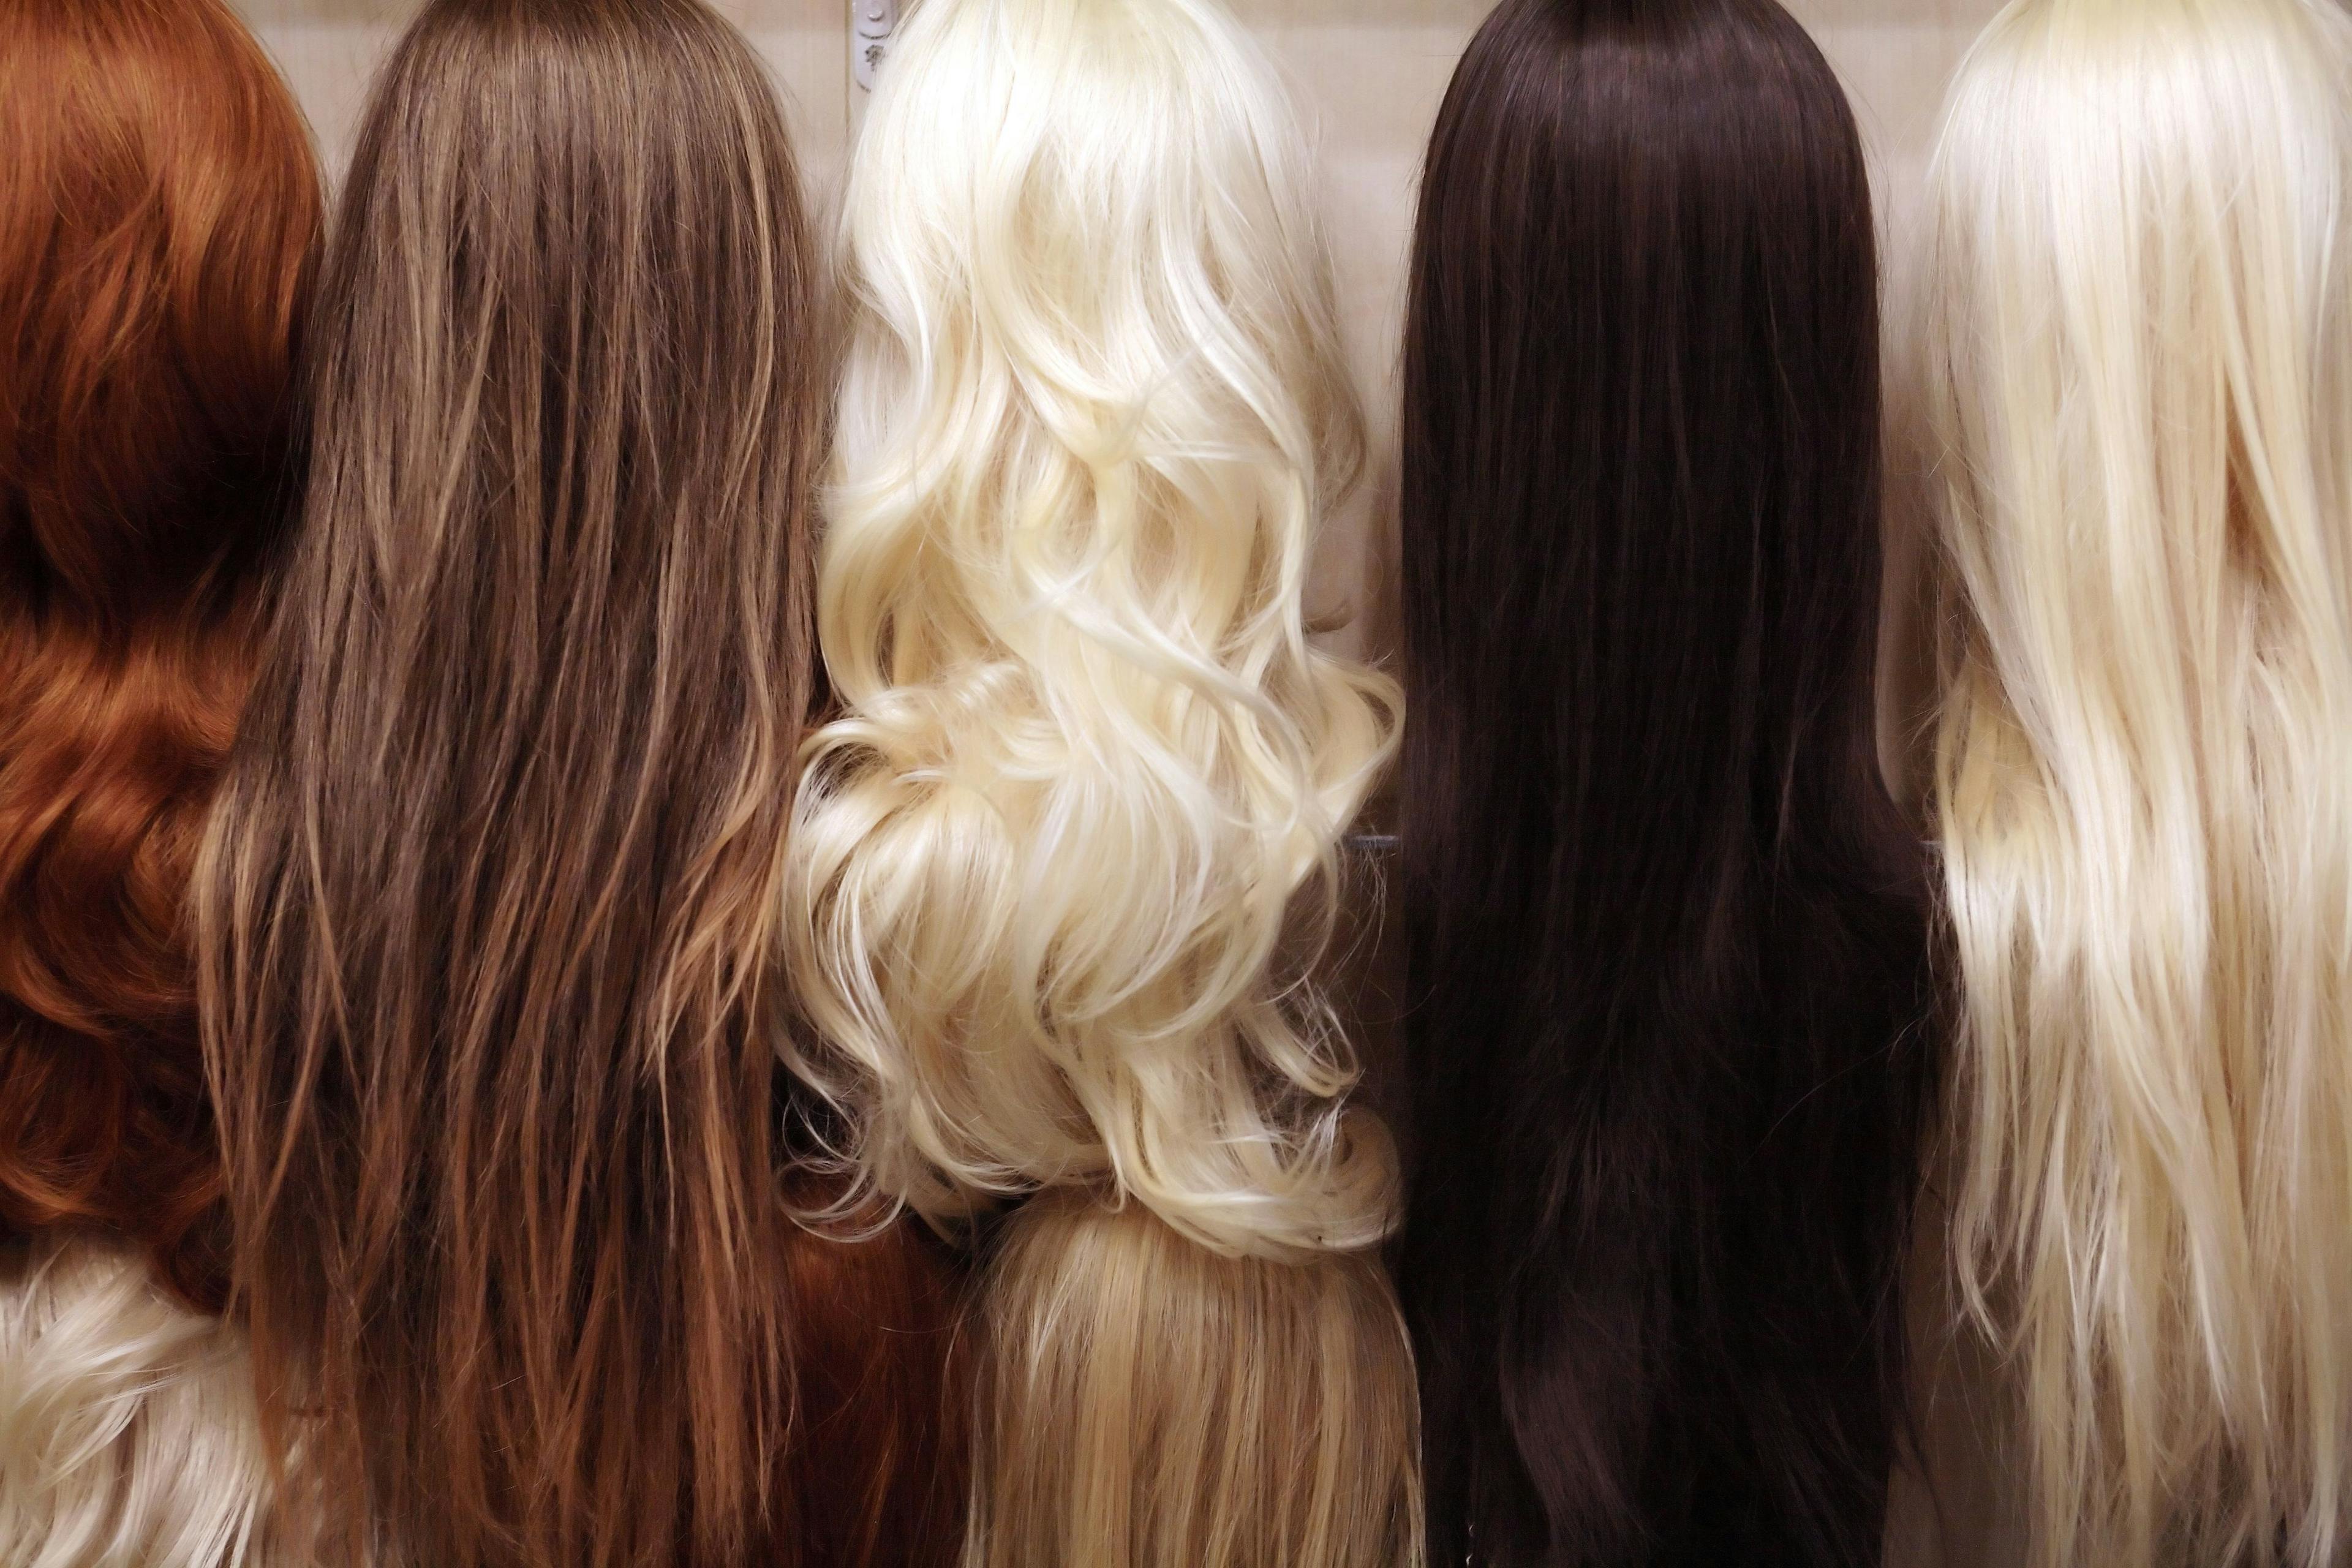 Image of eight different wigs of different colors: blonde, dark brown, red and light brown.